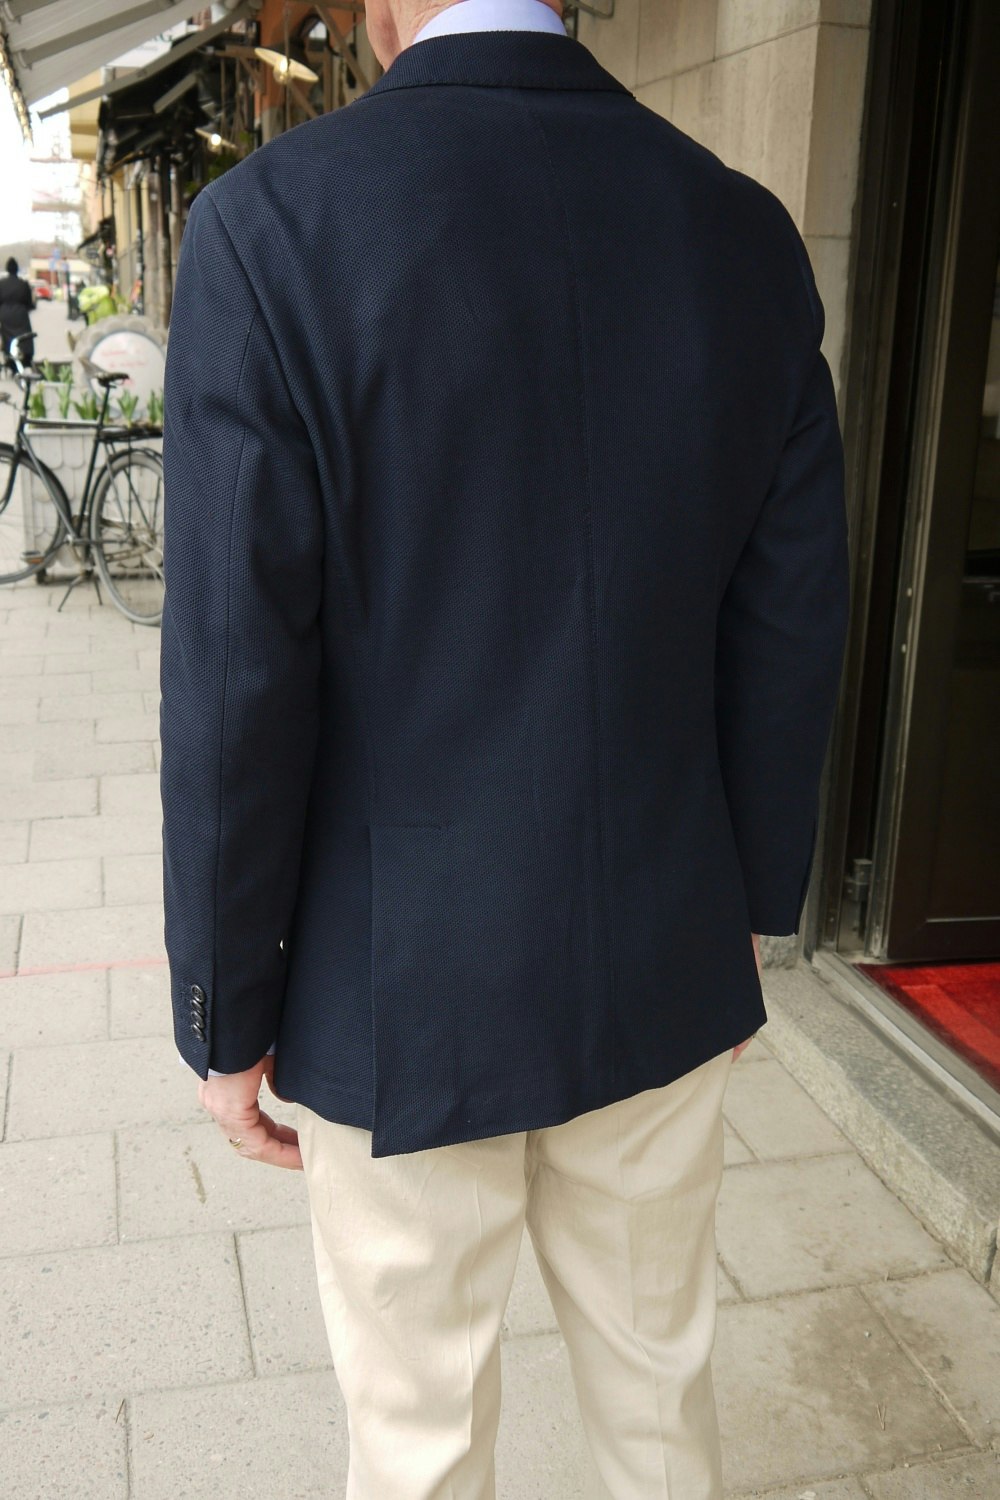 Solid Loro Piana Jacket - Unconstructed - Navy Blue - Only size 46 left!